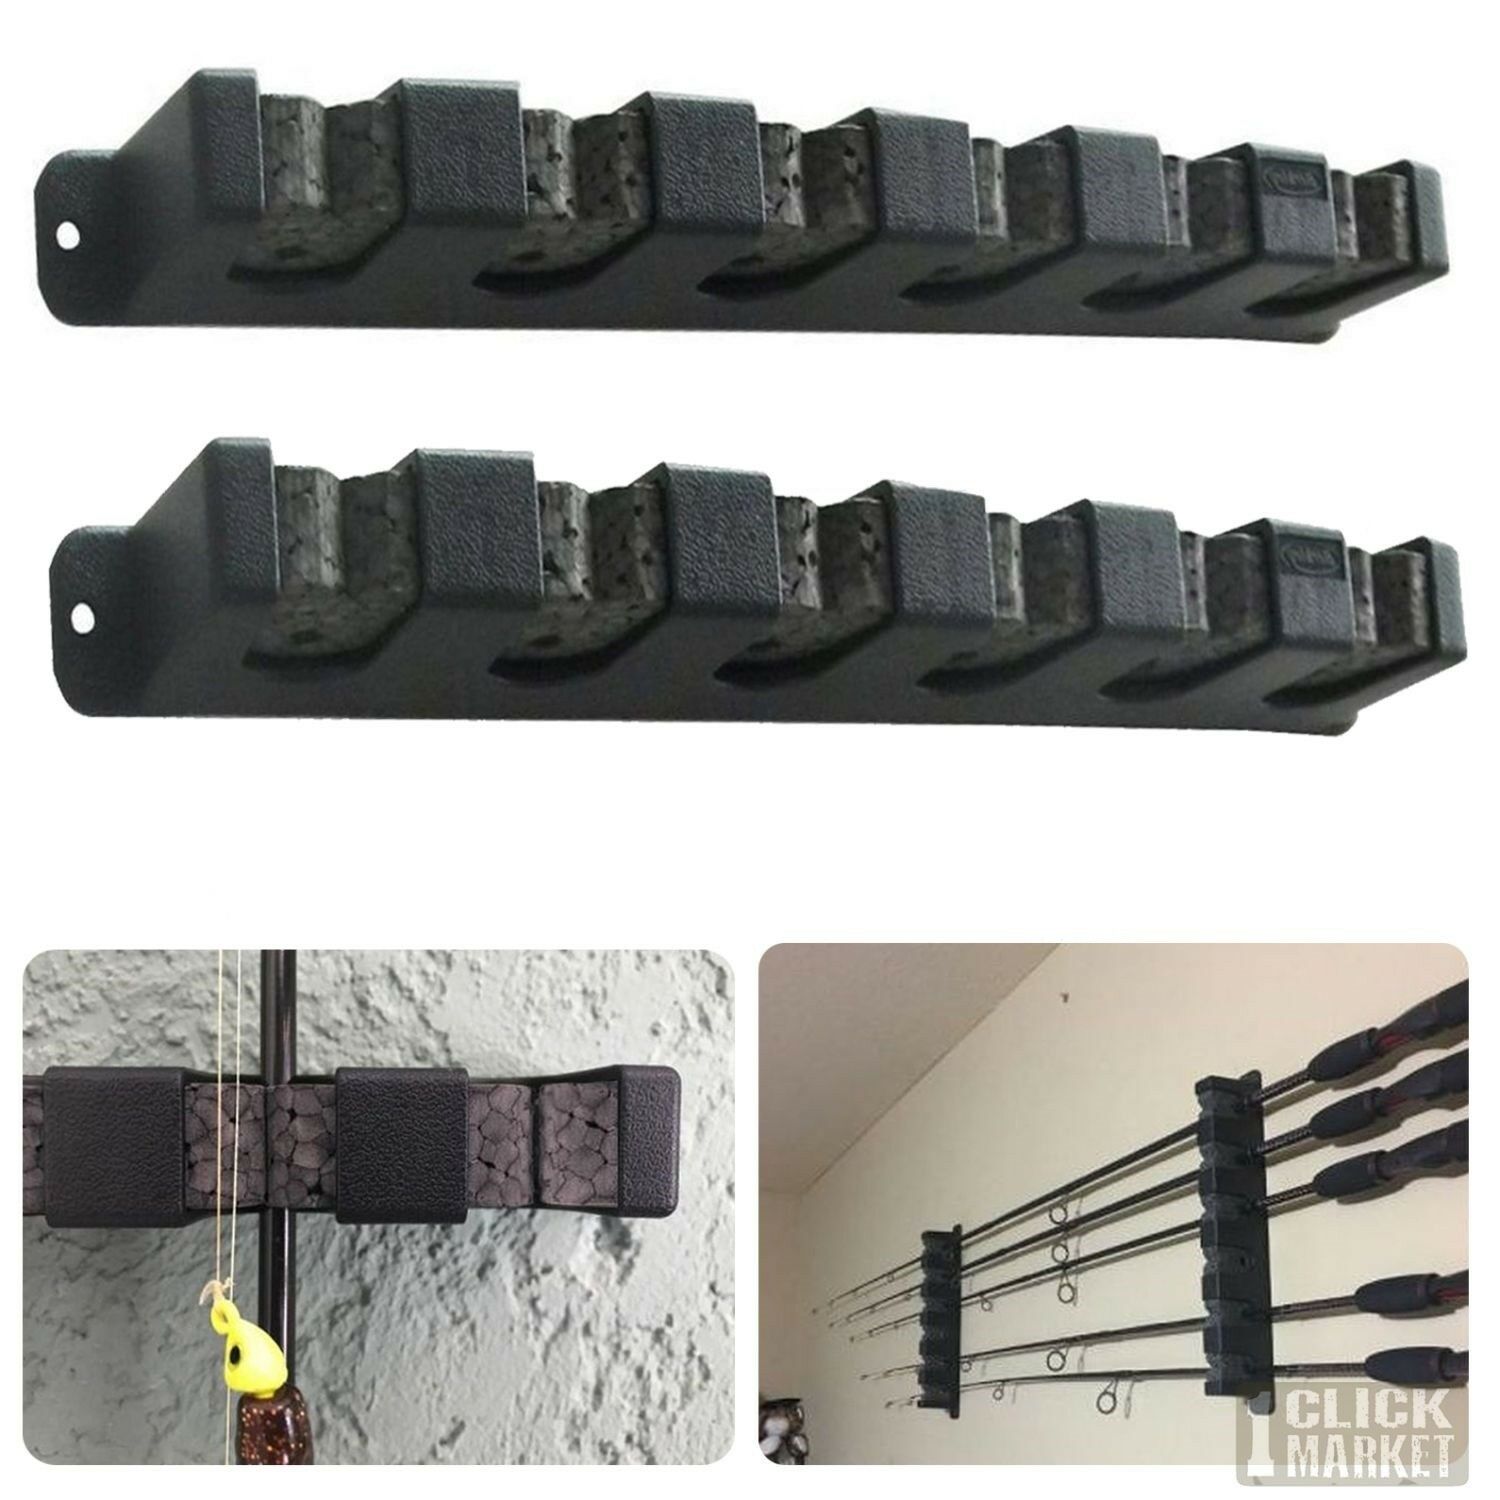 Fishing Rod Rack Vertical Holder Wall Mount Storage Horizontal Boat Pole Stand